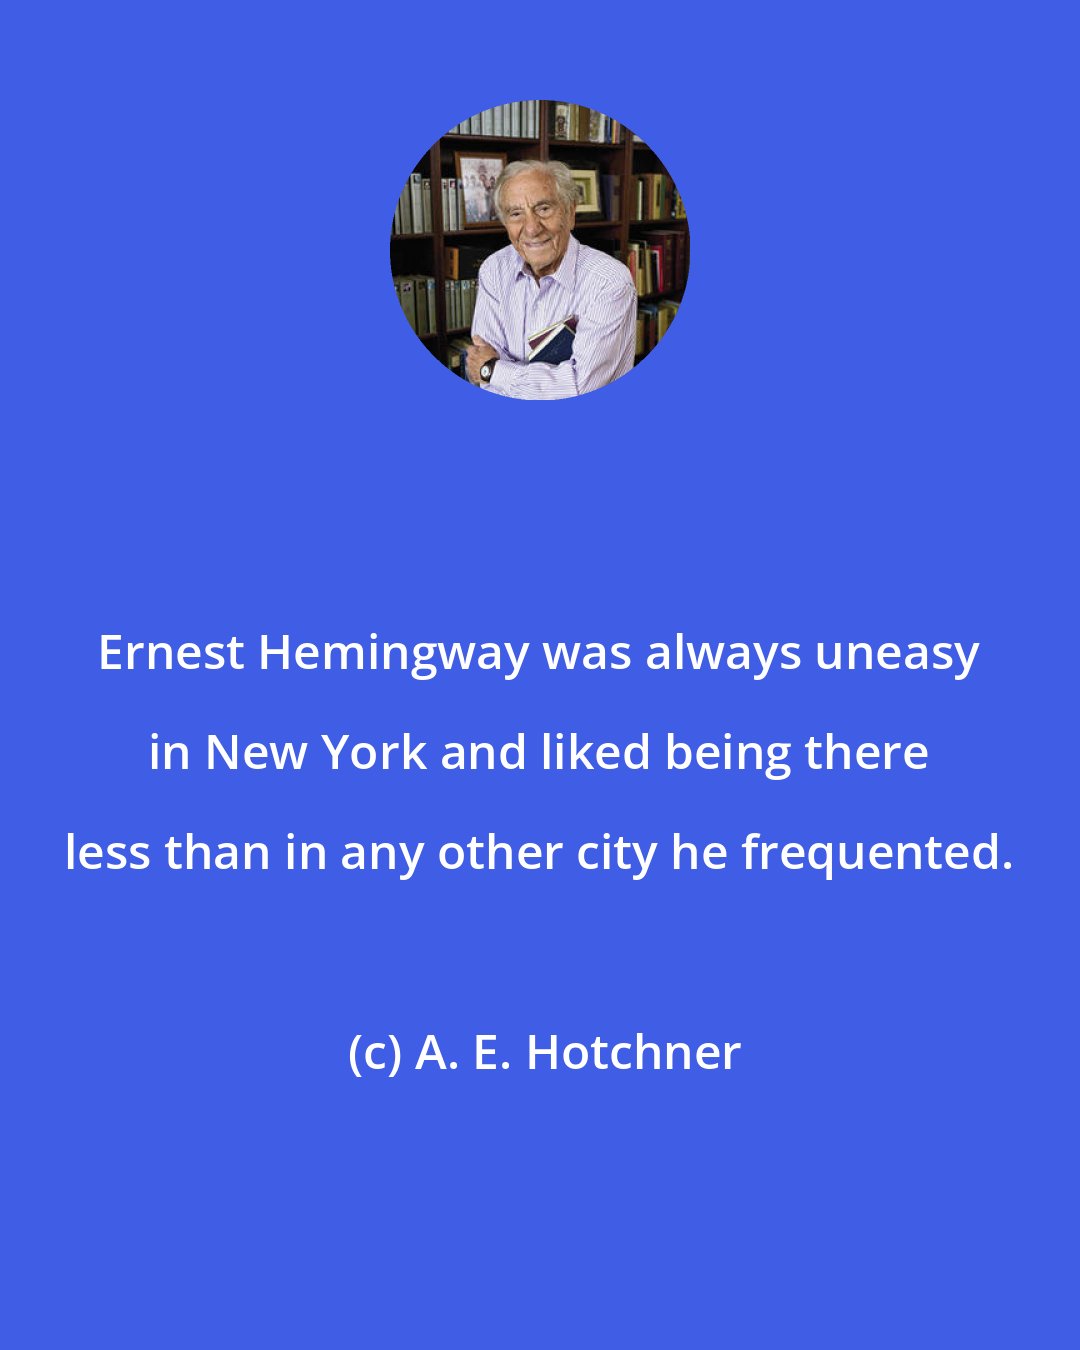 A. E. Hotchner: Ernest Hemingway was always uneasy in New York and liked being there less than in any other city he frequented.